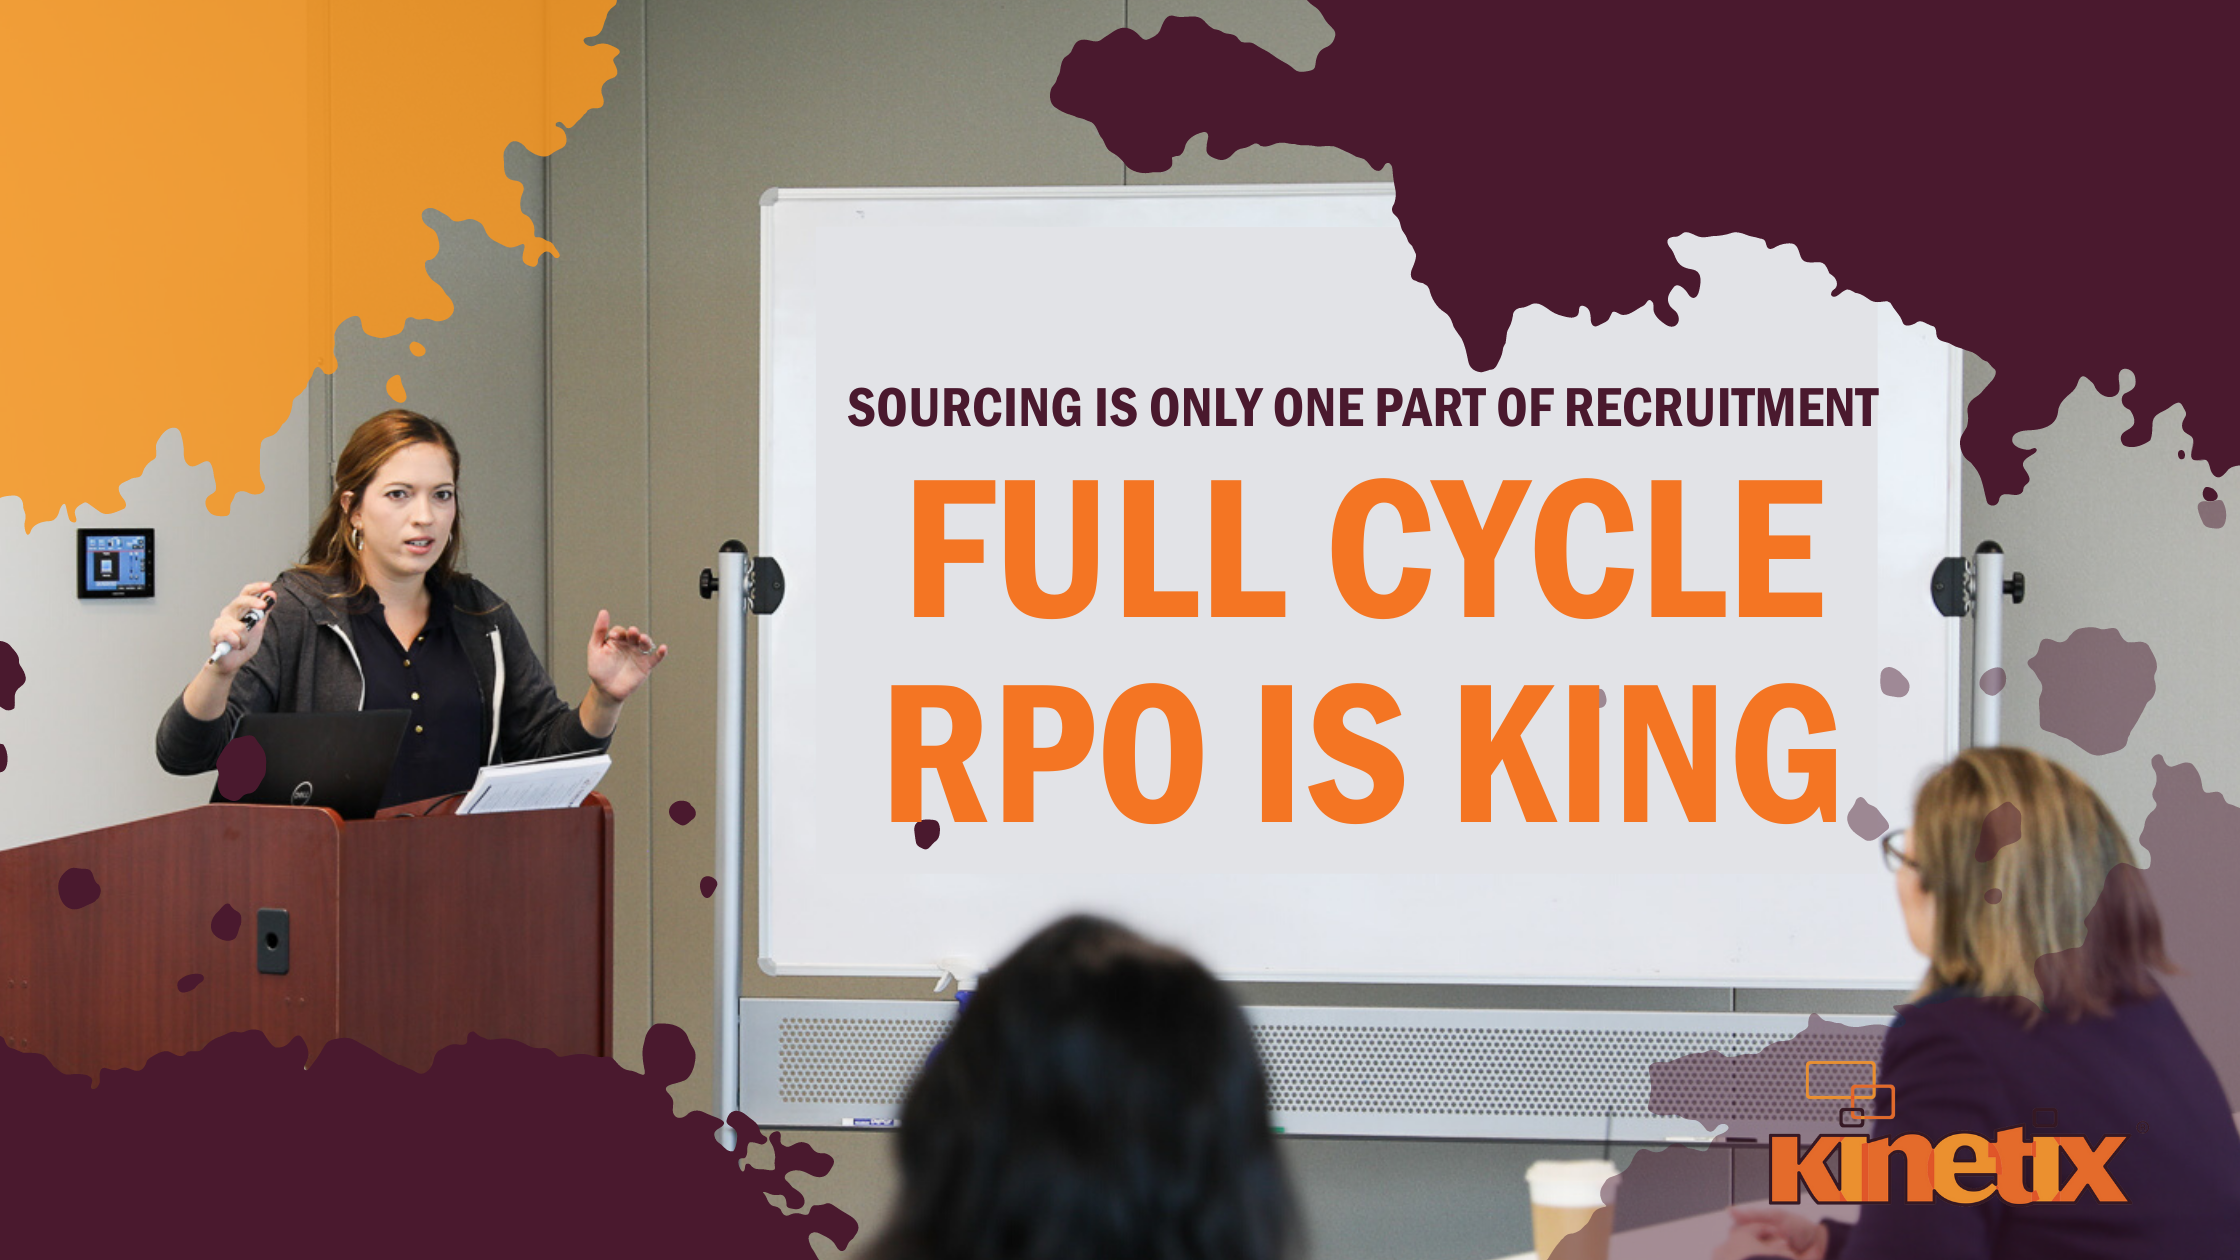 Why Full-Cycle RPO is King